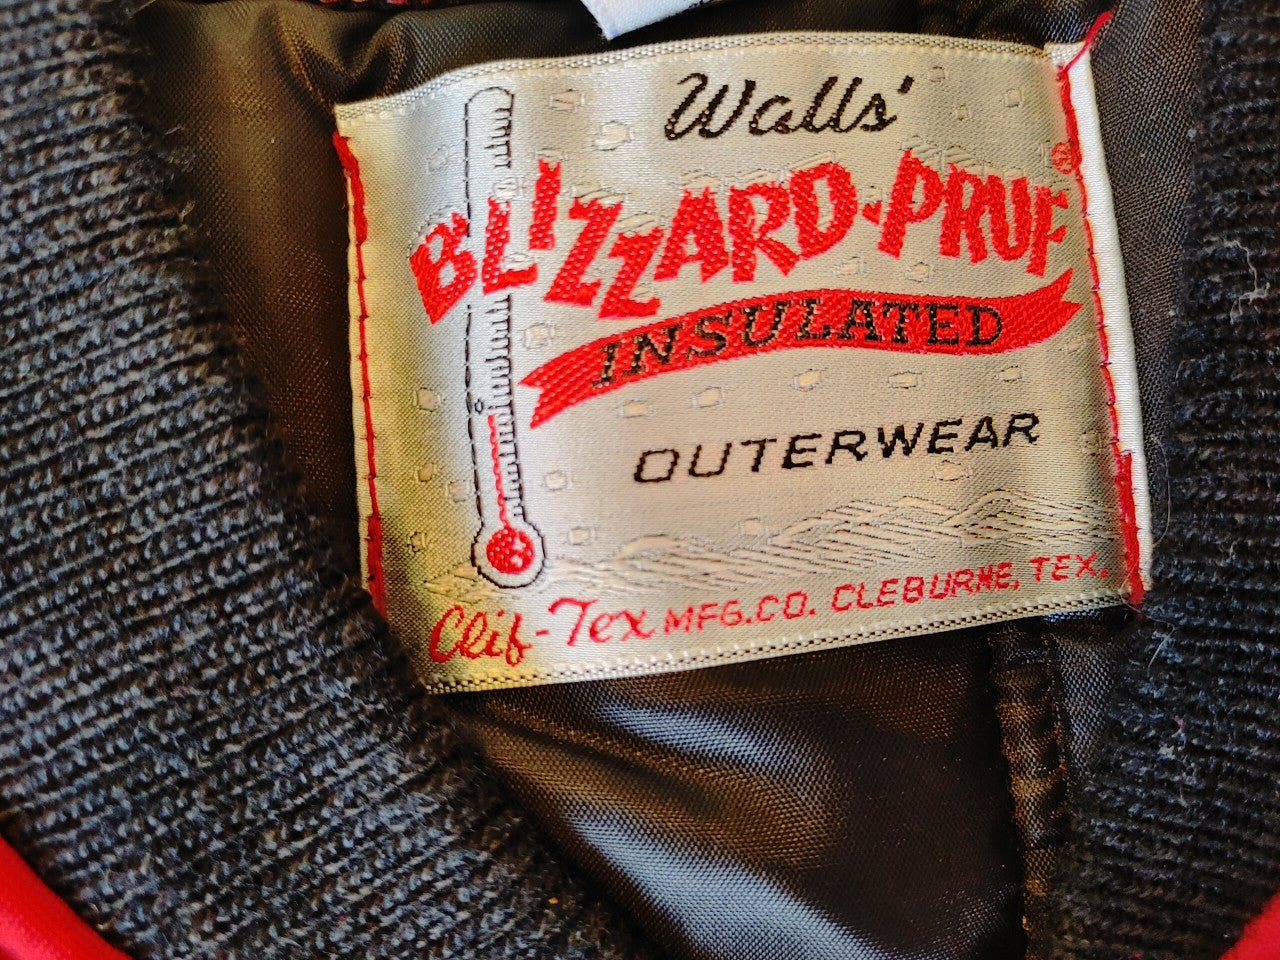 What's Up Doc? Vintage Walls Blizzard Pruf Vest Safety Red Large Texas